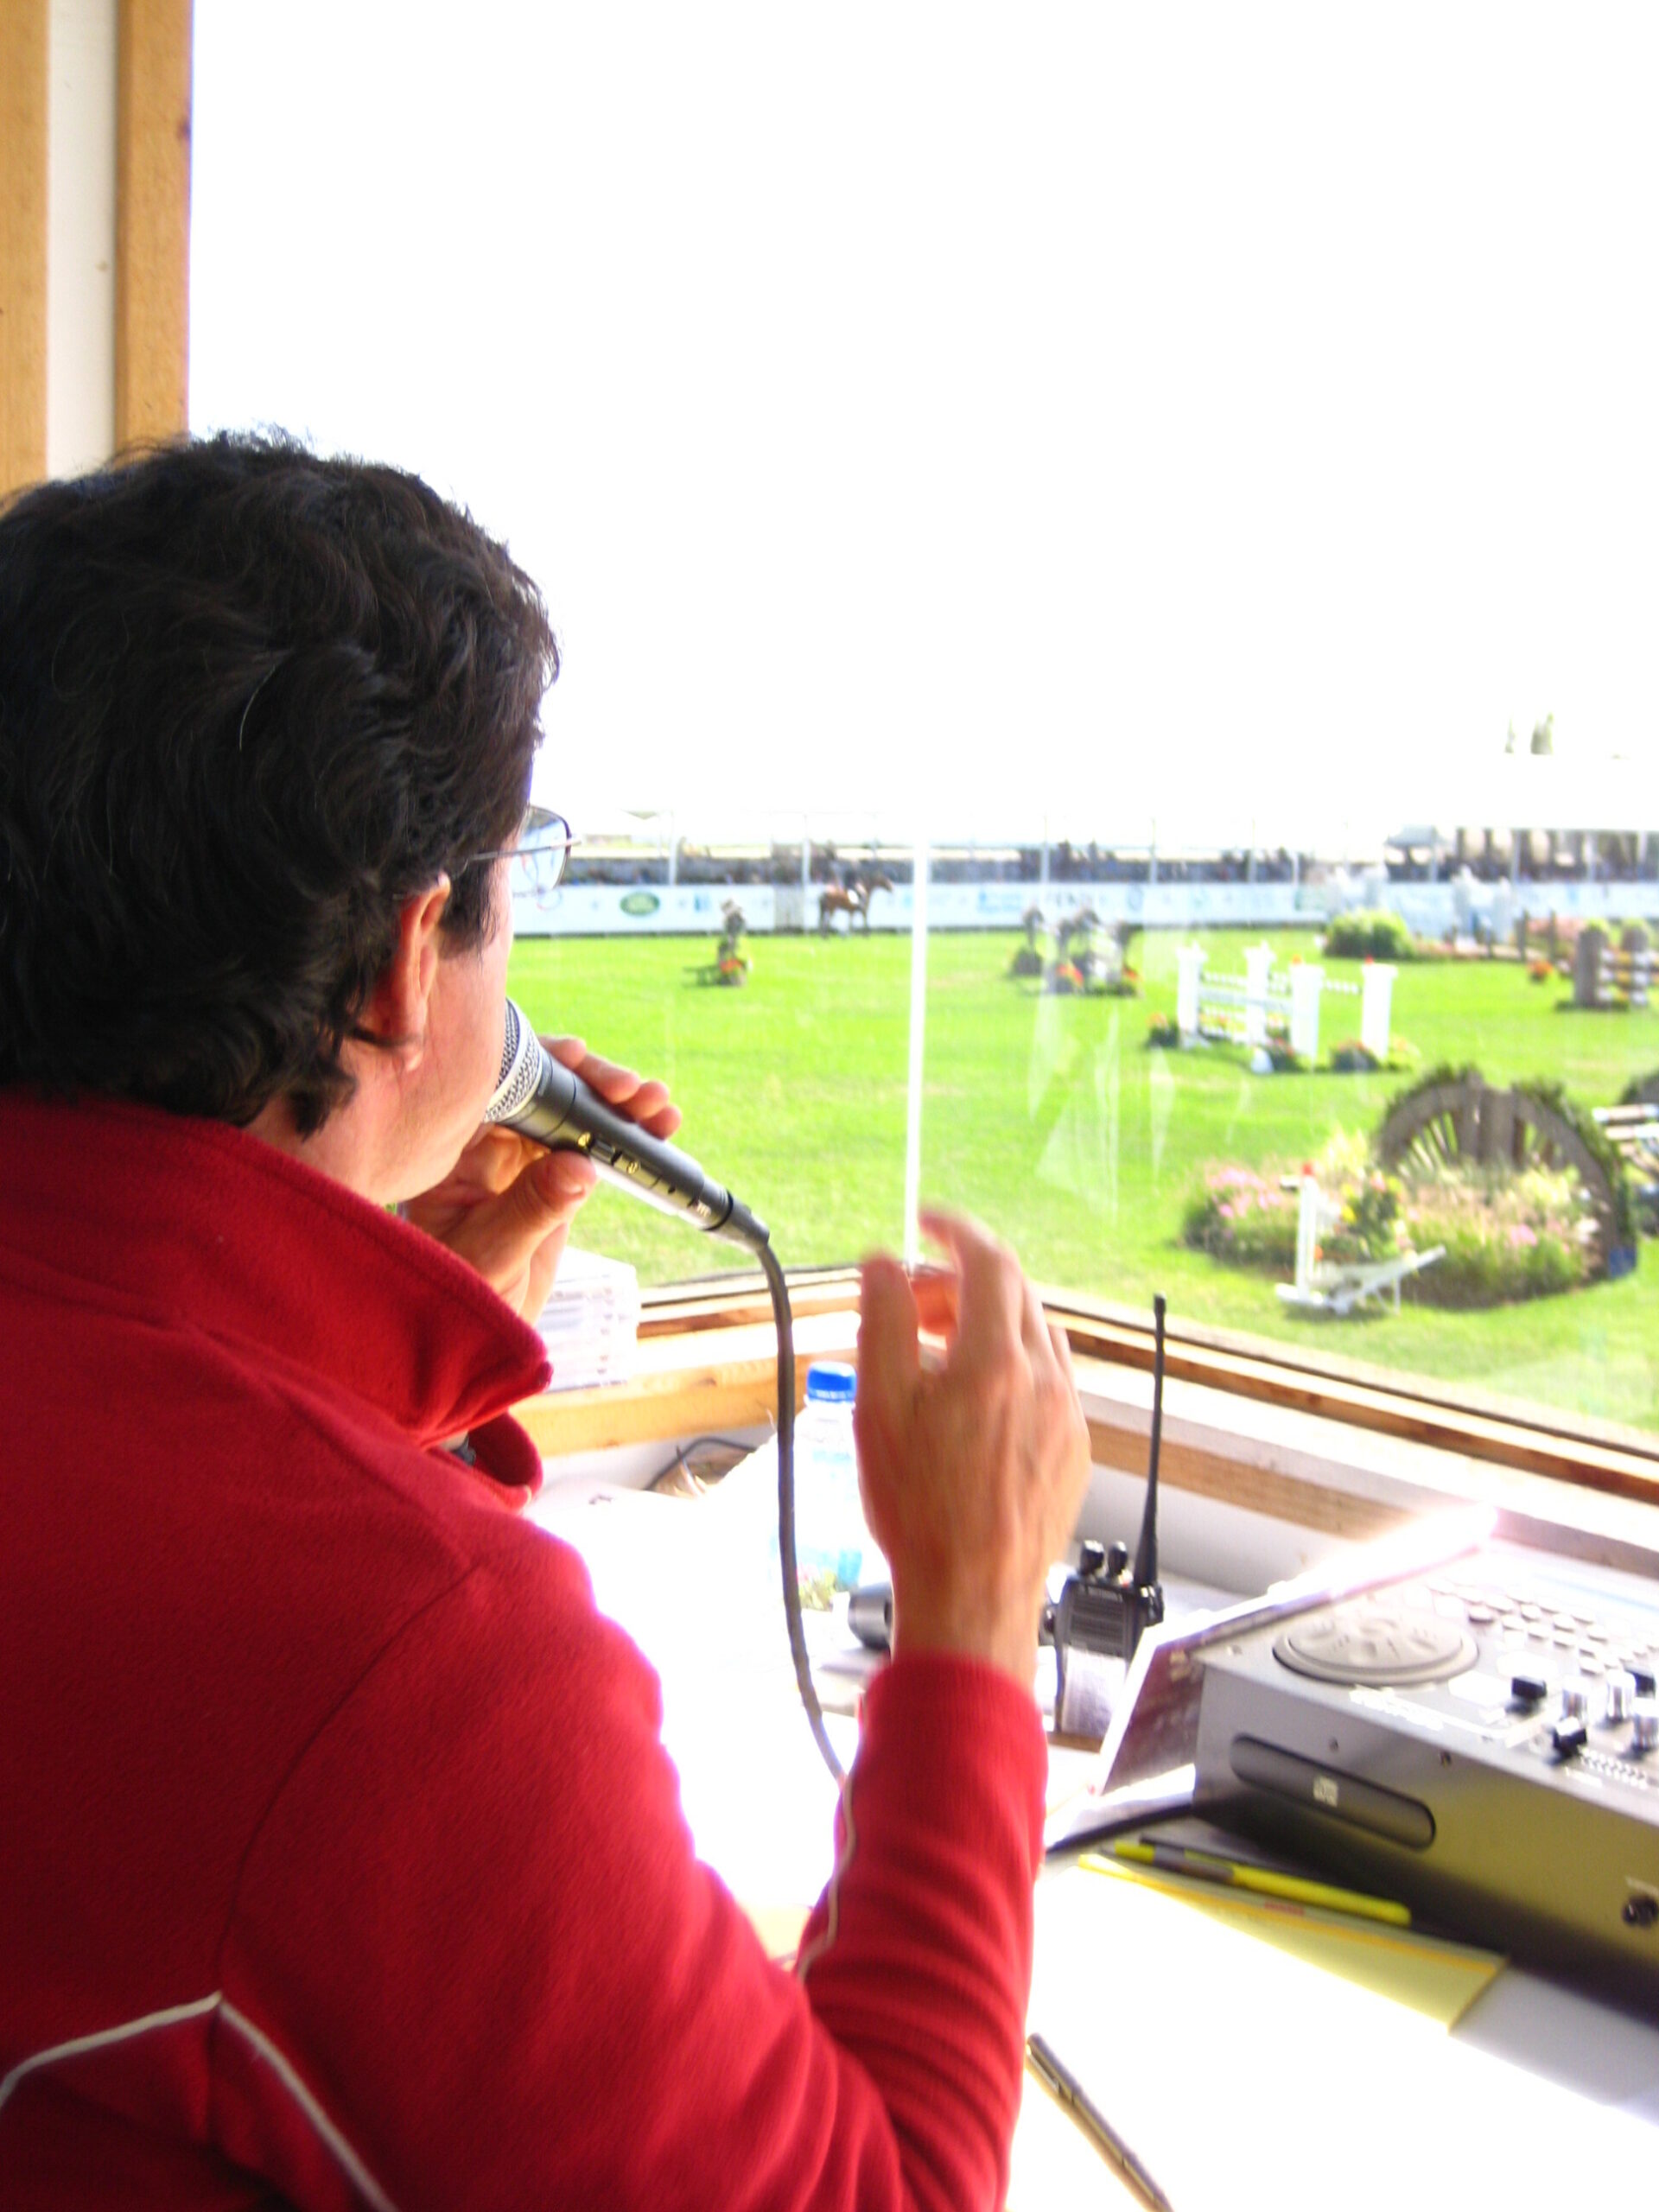 Peter Doubleday has been announcing the Hampton Classic since its earliest days in the late 1970s. KATE SOROKA PHOTOS